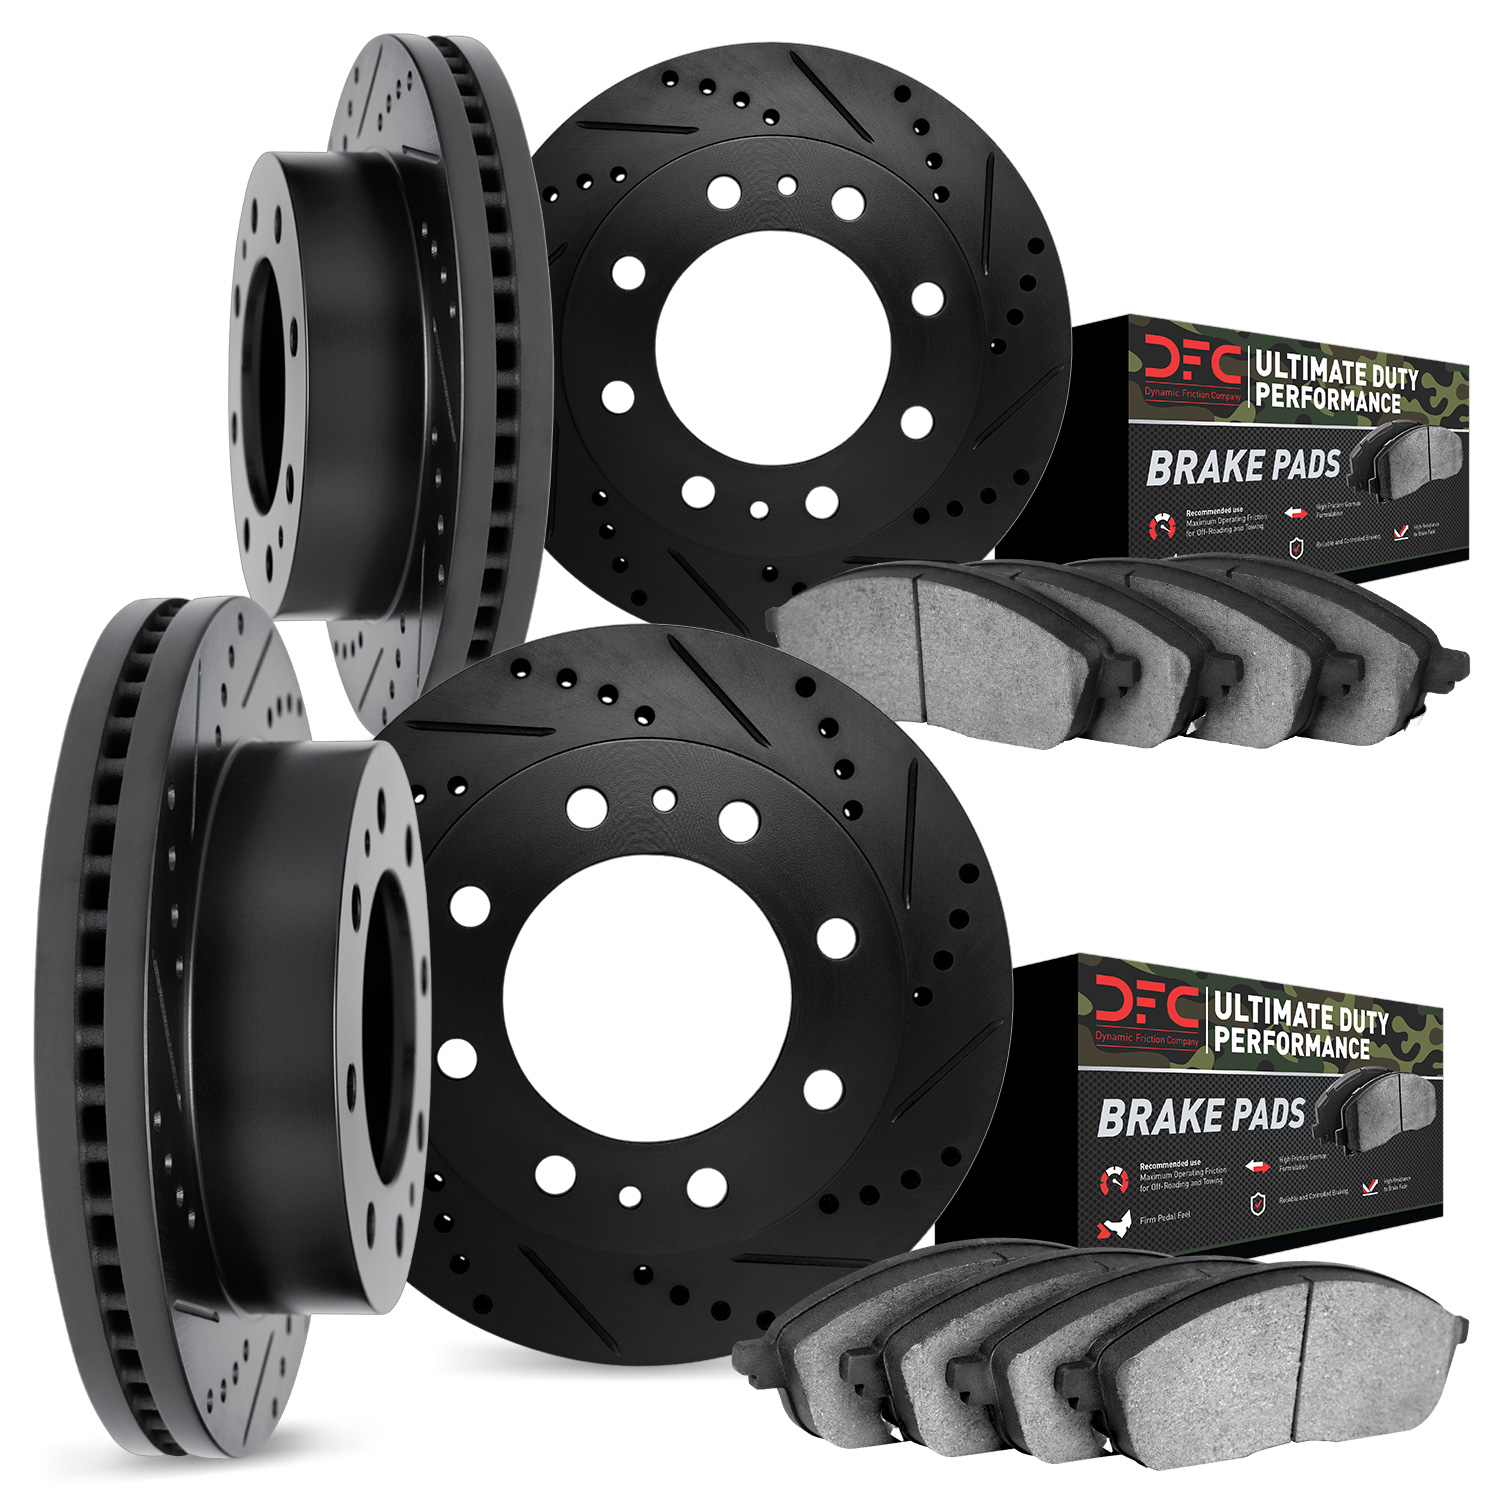 8404-48020 Drilled/Slotted Brake Rotors with Ultimate-Duty Brake Pads Kit [Black], 2011-2019 GM, Position: Front and Rear